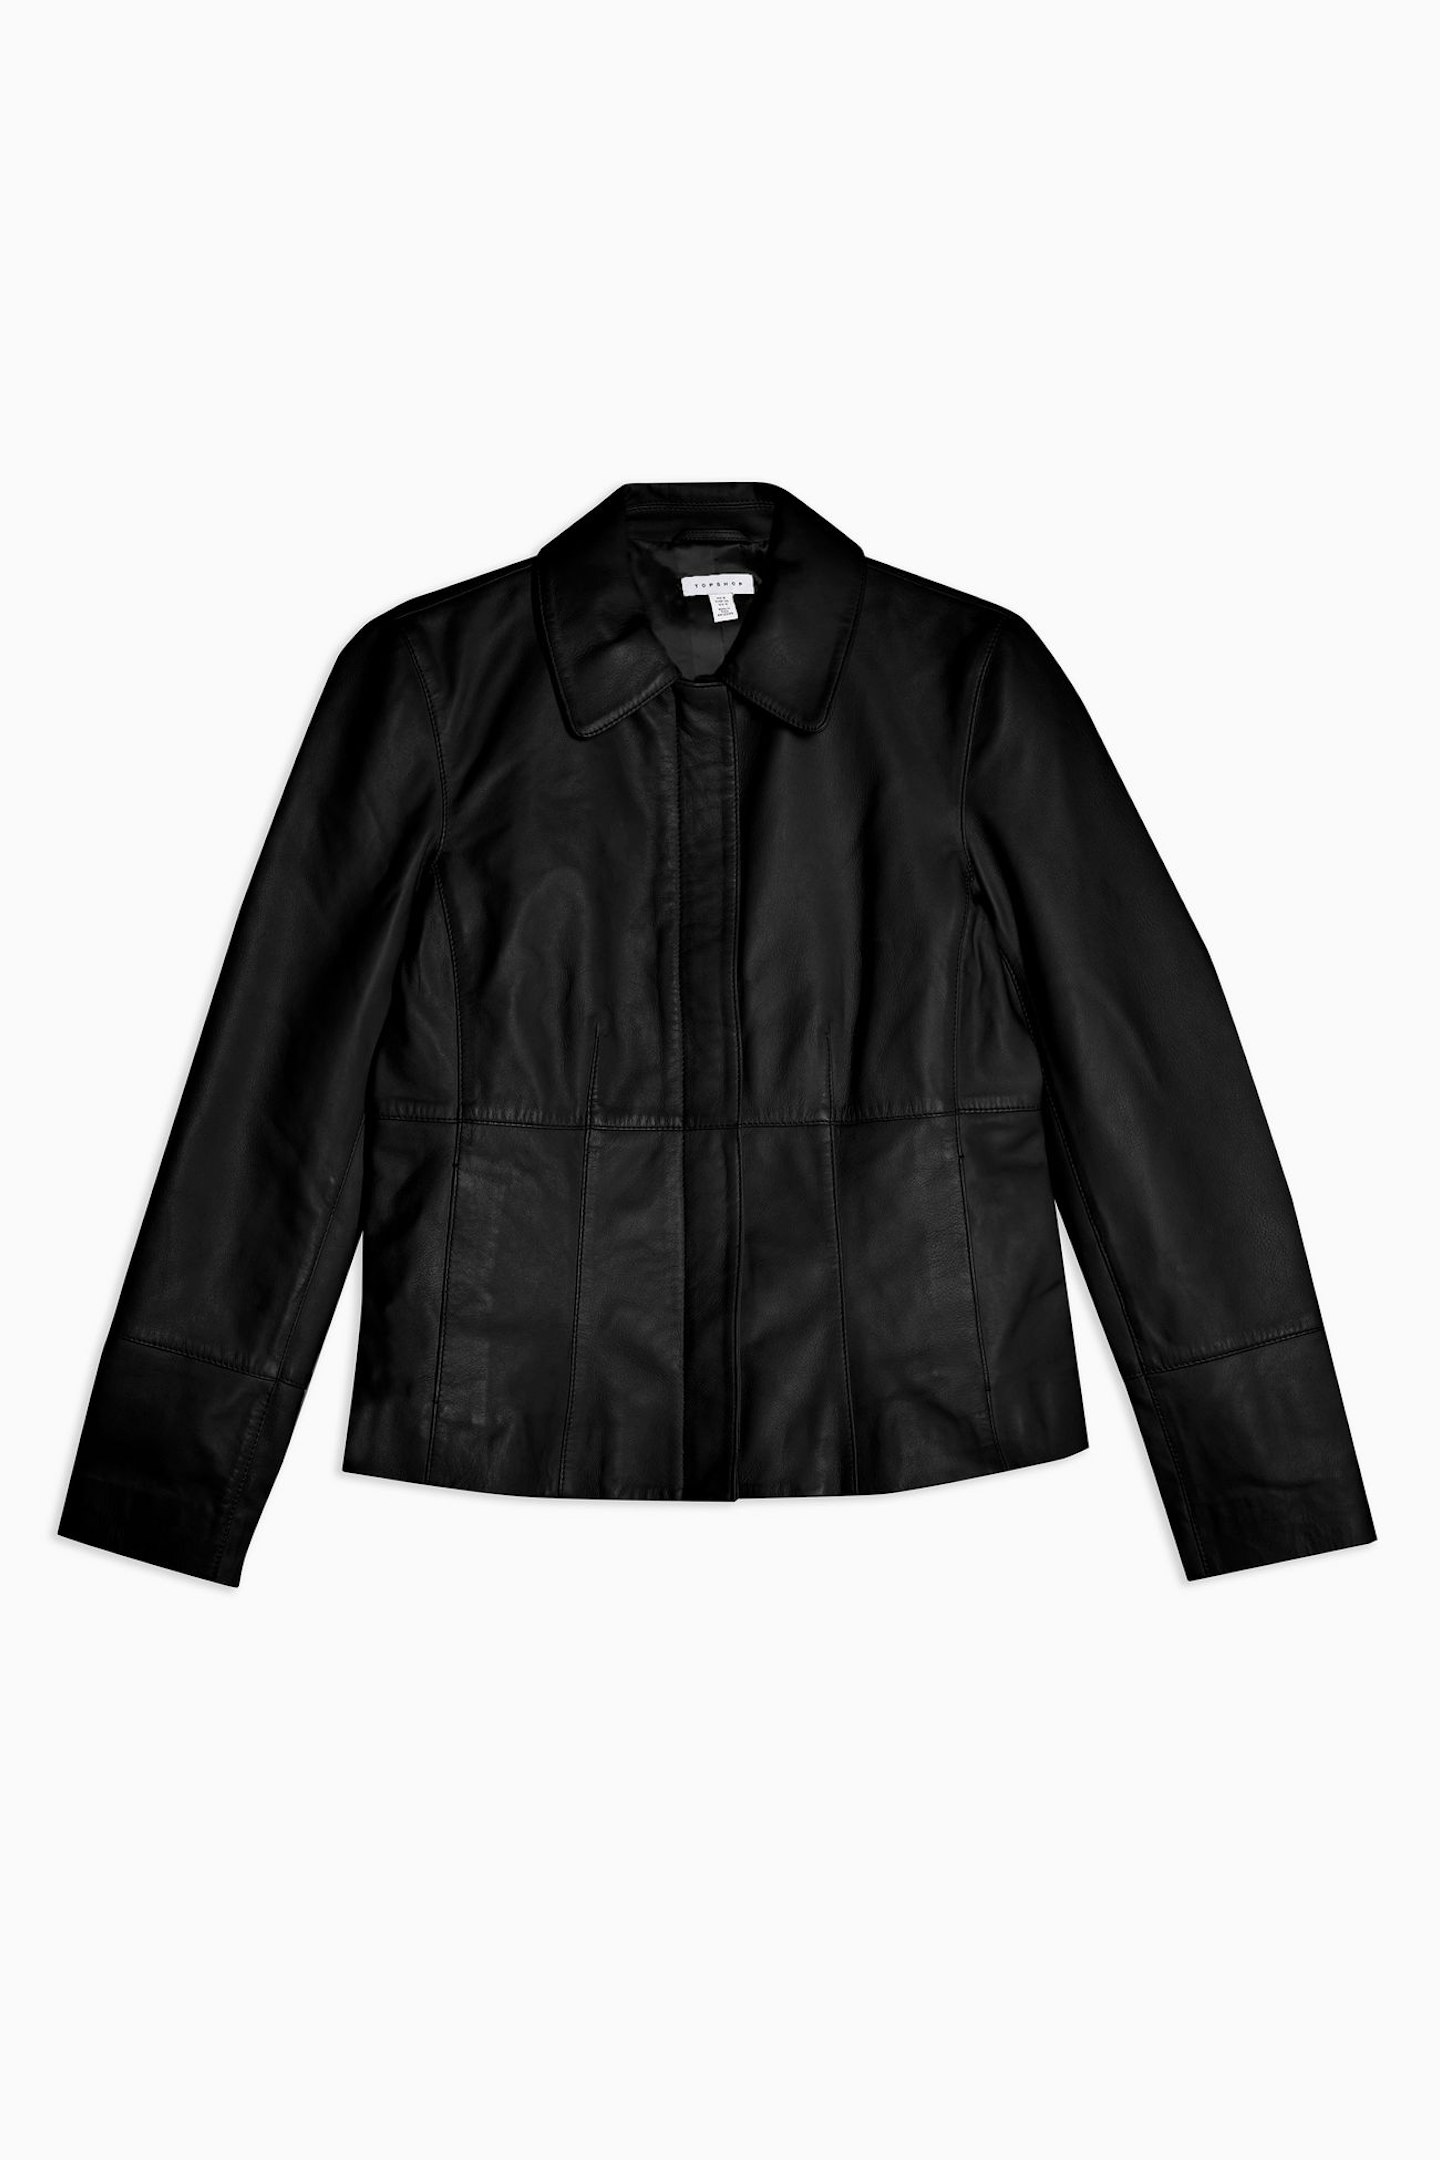 Black Leather Fitted Jacket, £195, Topshop